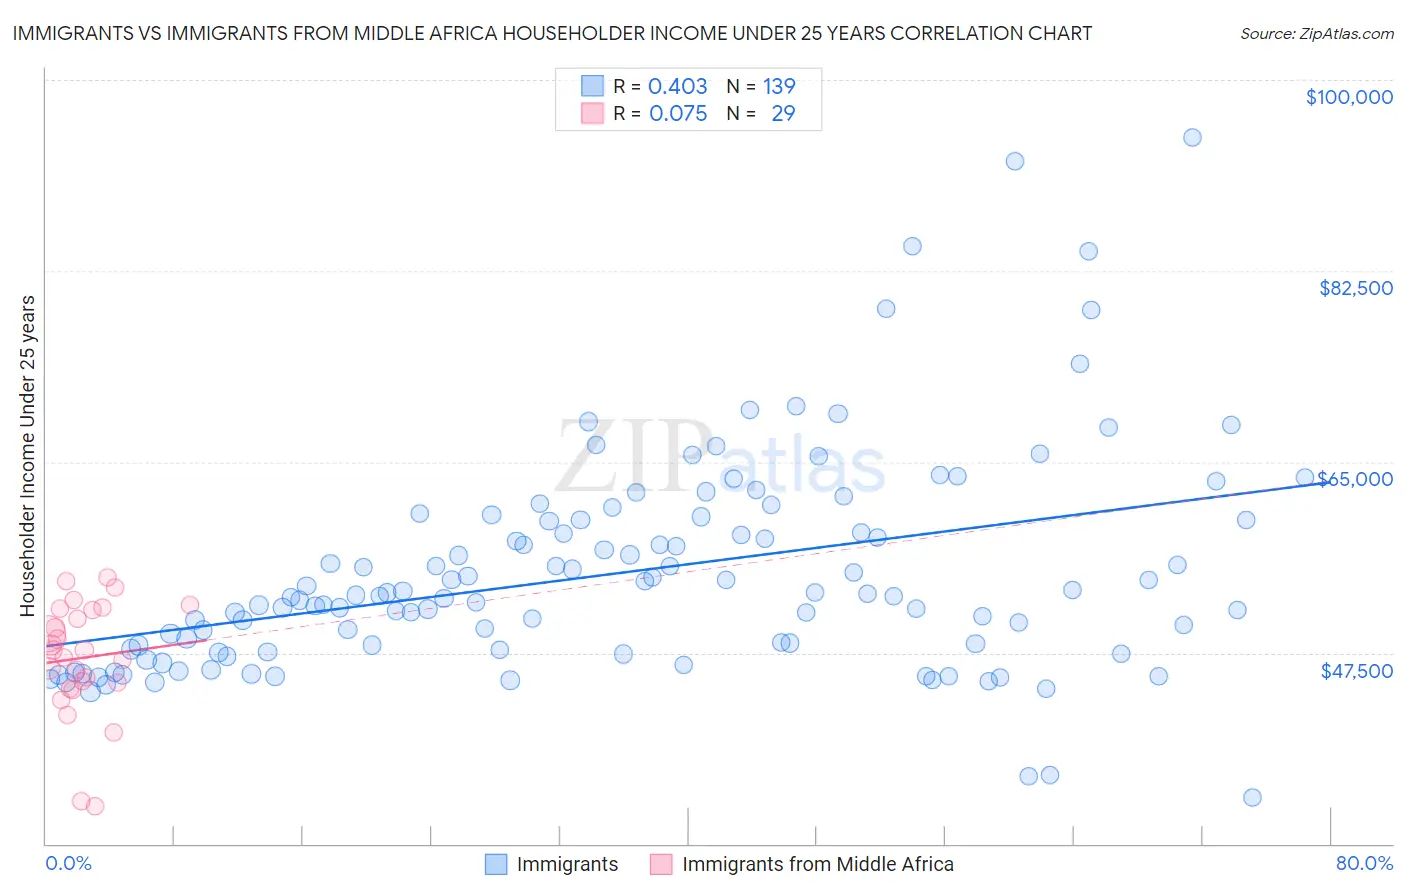 Immigrants vs Immigrants from Middle Africa Householder Income Under 25 years